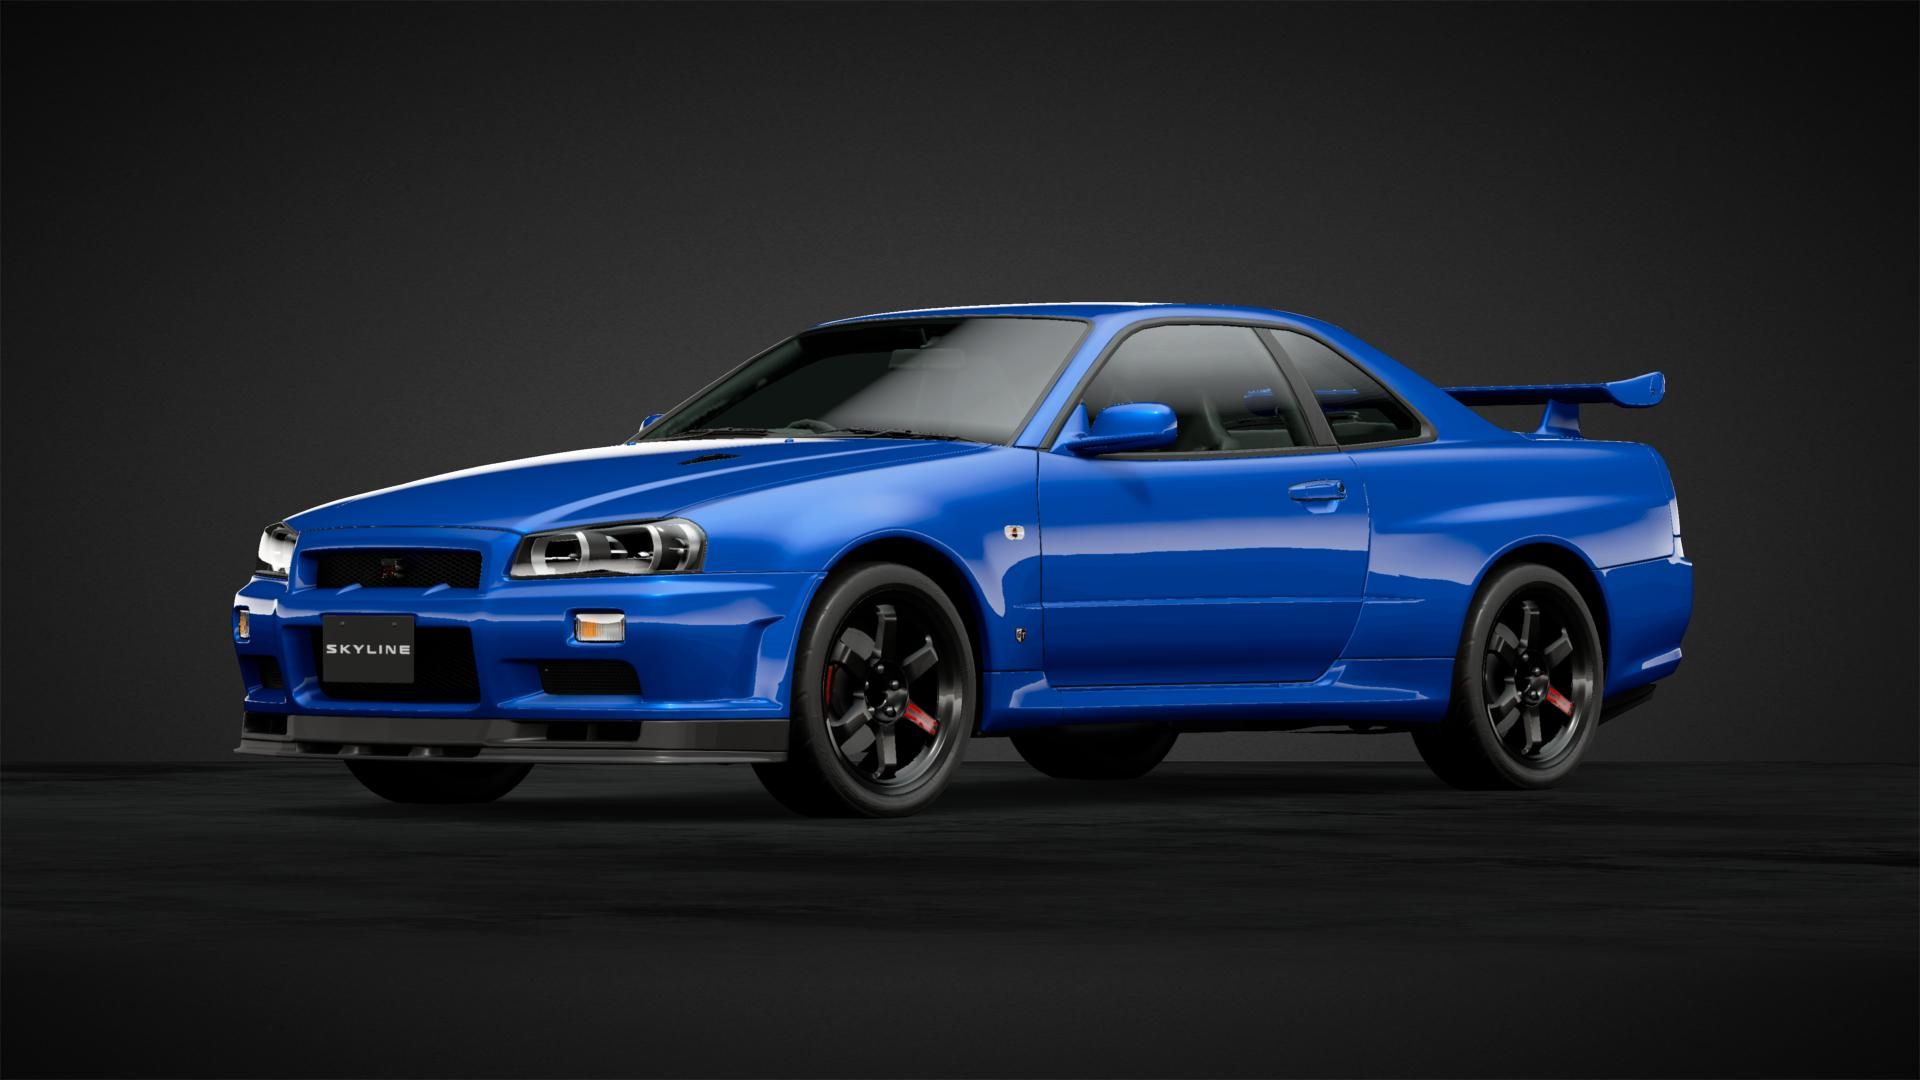 R34 In Game